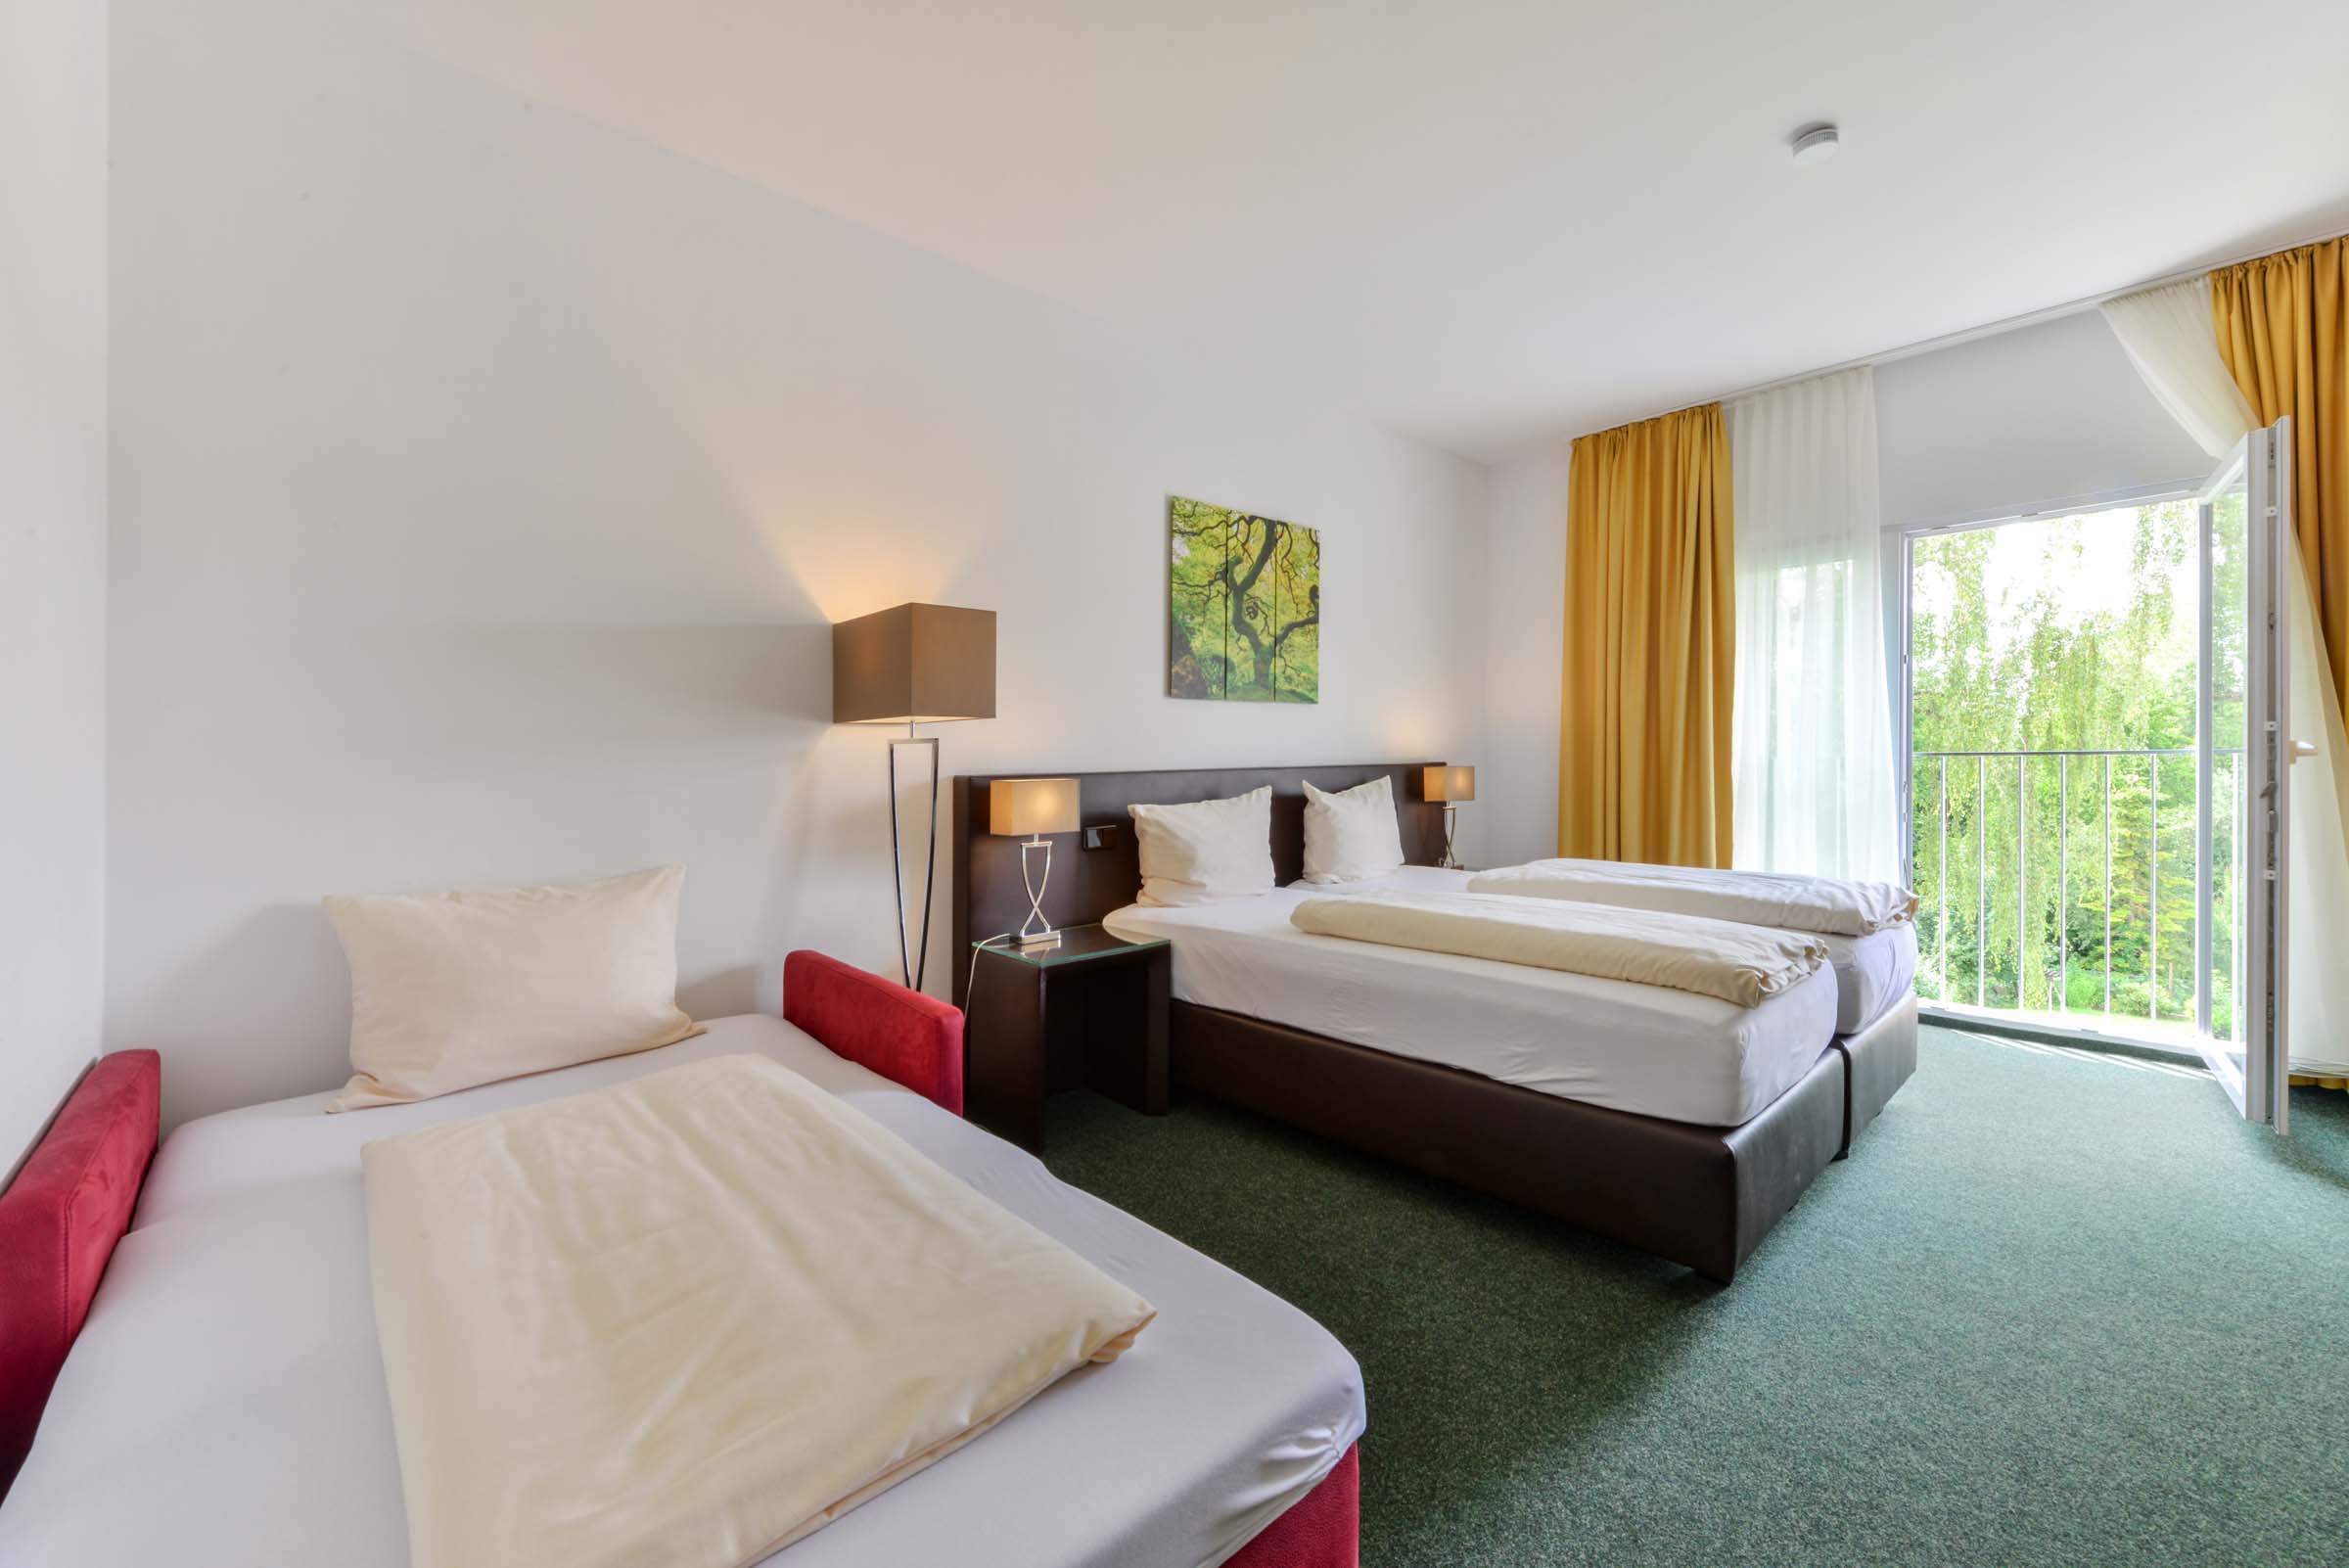 Hotel Nagerl - double rooms with sofa bed